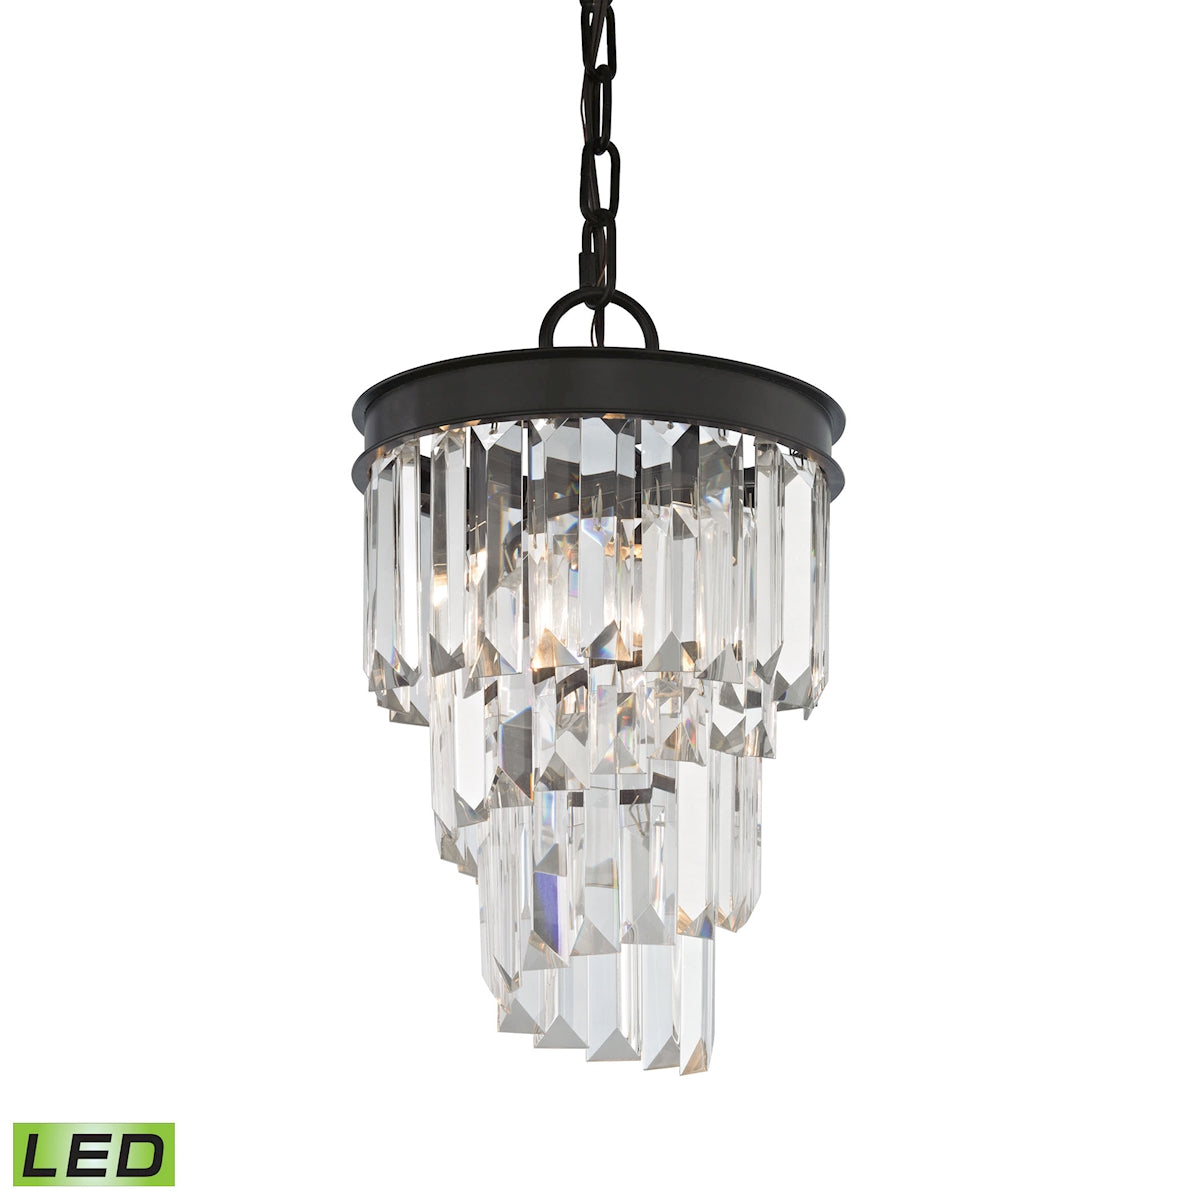 ELK Lighting 14216/1-LED Palacial 1-Light Mini Pendant in Oil Rubbed Bronze with Clear Crystal - Includes LED Bulb